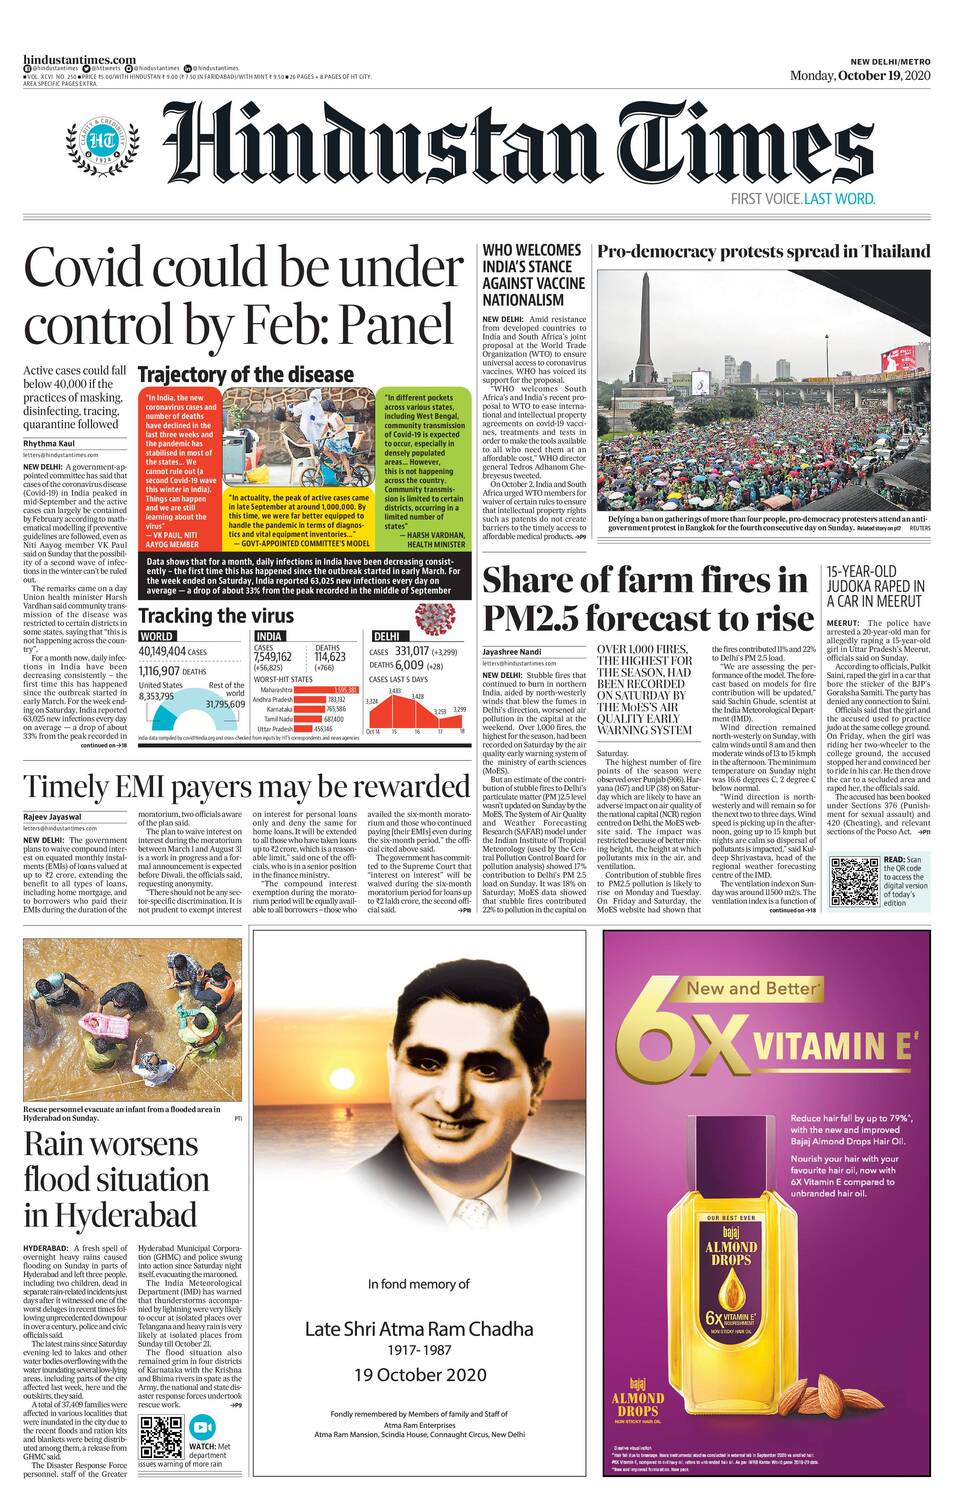 Newspaper Headlines: Covid Can Be Controlled By February 2021, Says Panel And Other Top Stories